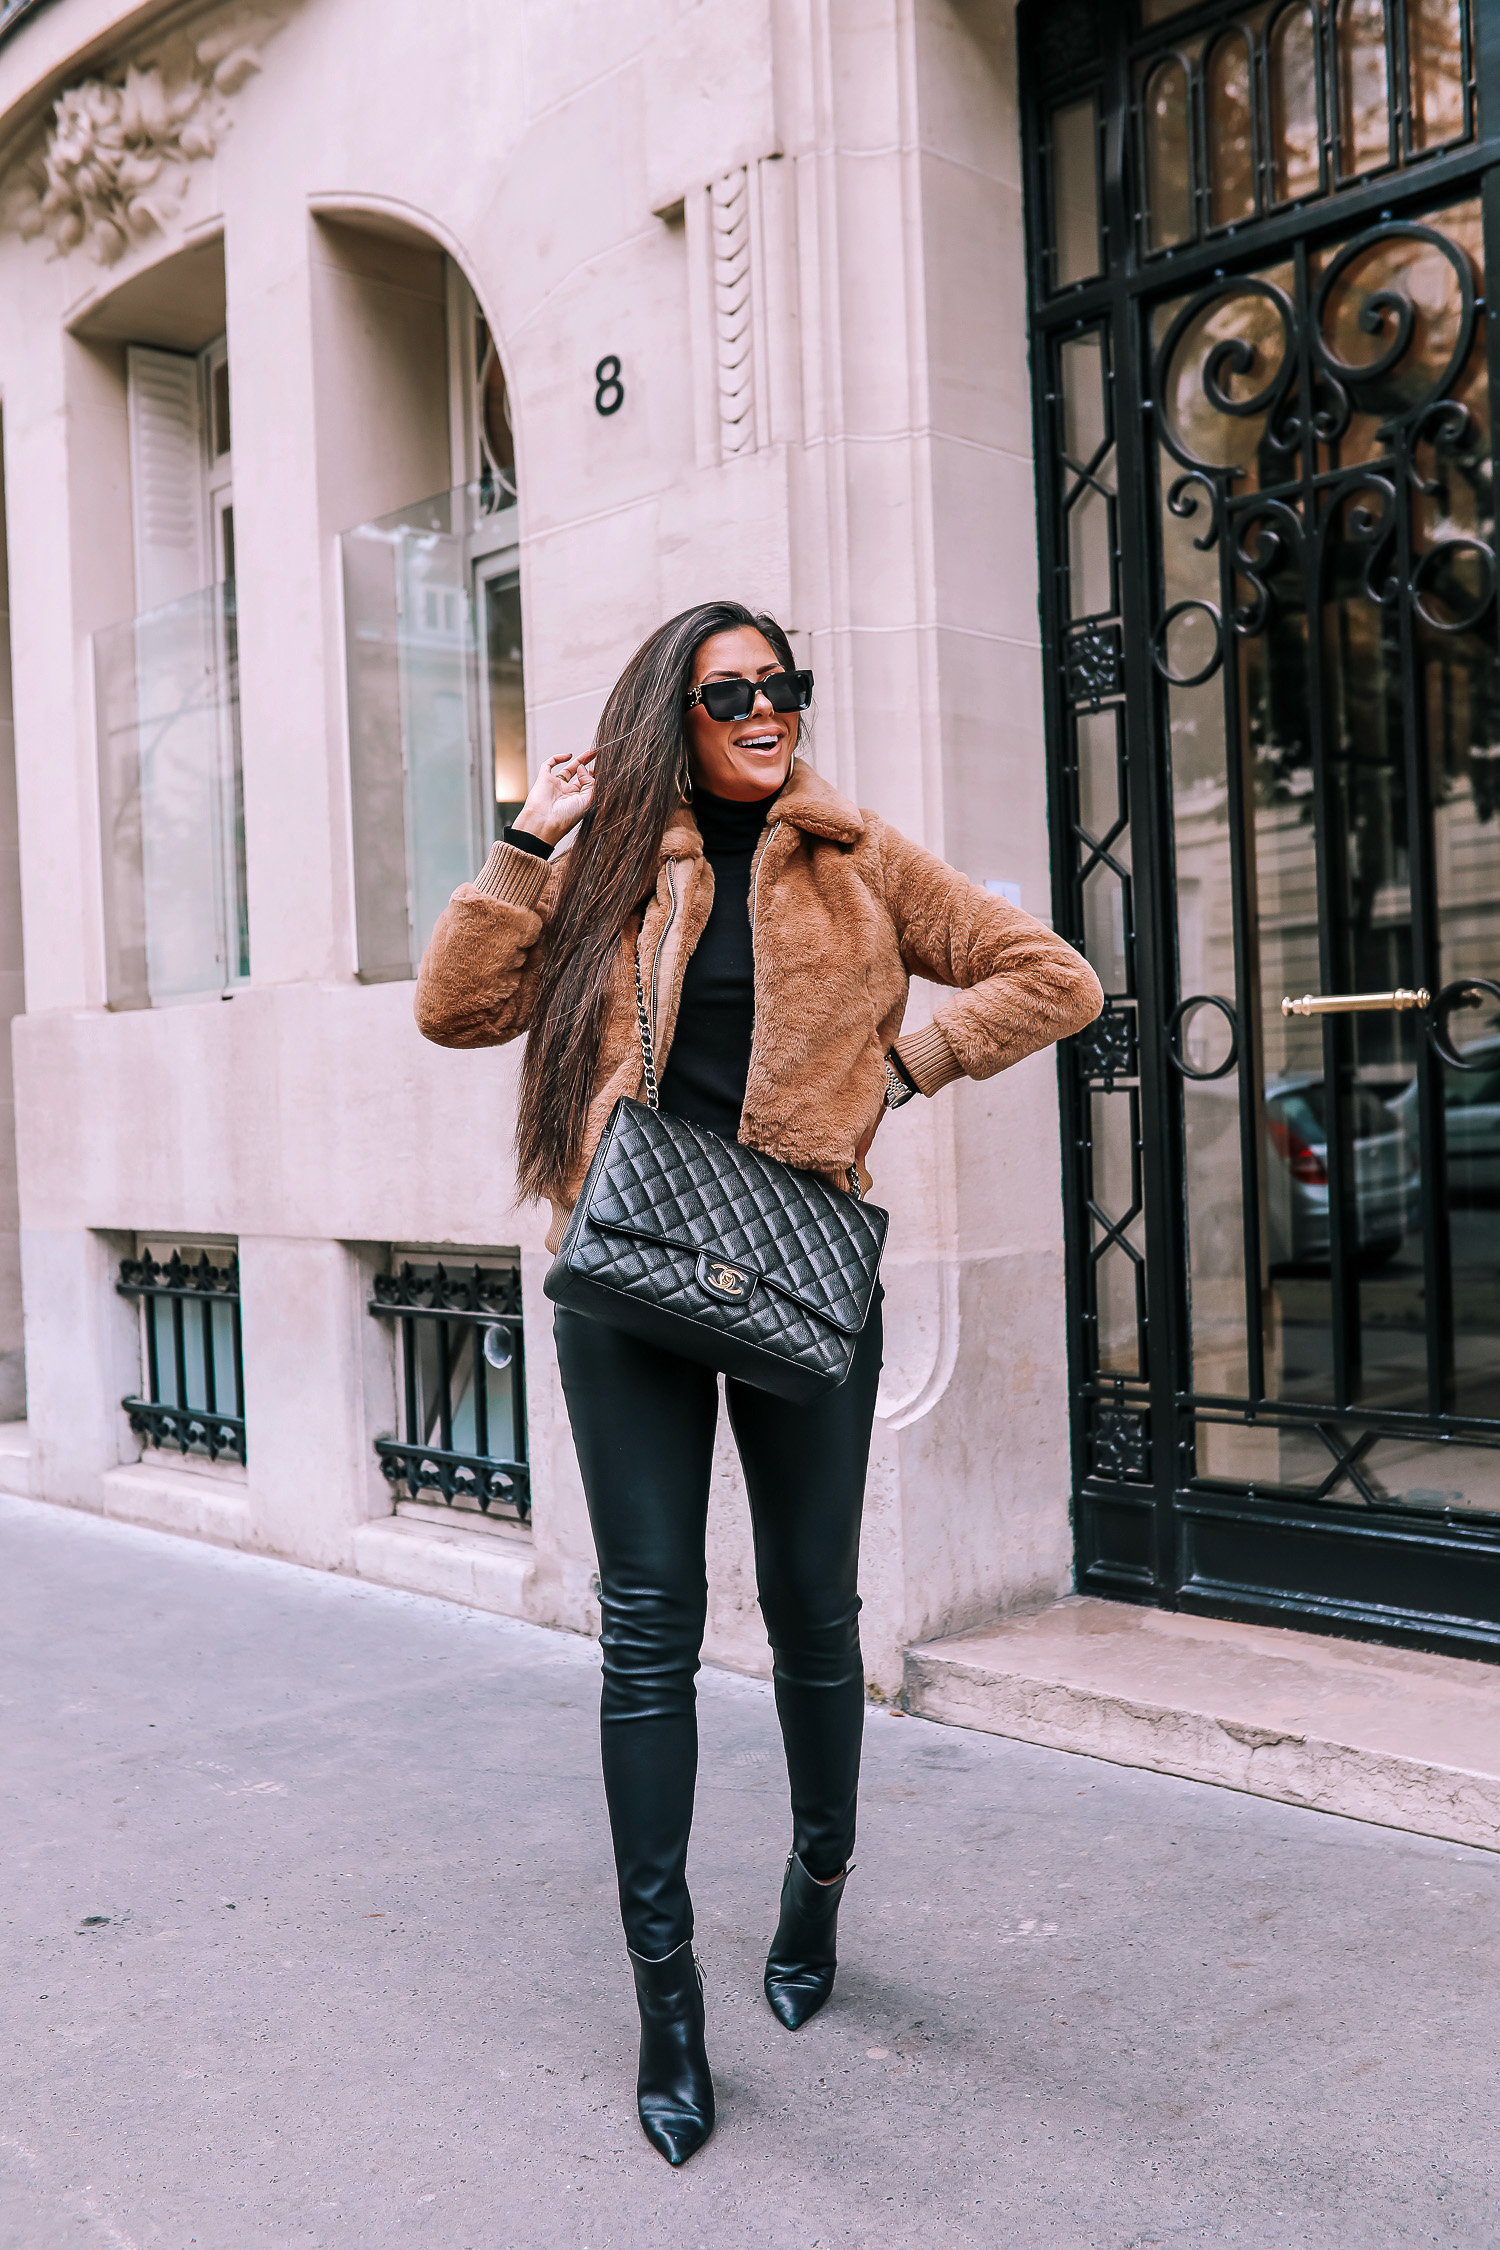 paris fall fashion 2019, fall fashion 2019, banana republic fall outfits 2019, paris outfit ideas fall and winter, what to wear in paris in october november, emily ann gemma-2